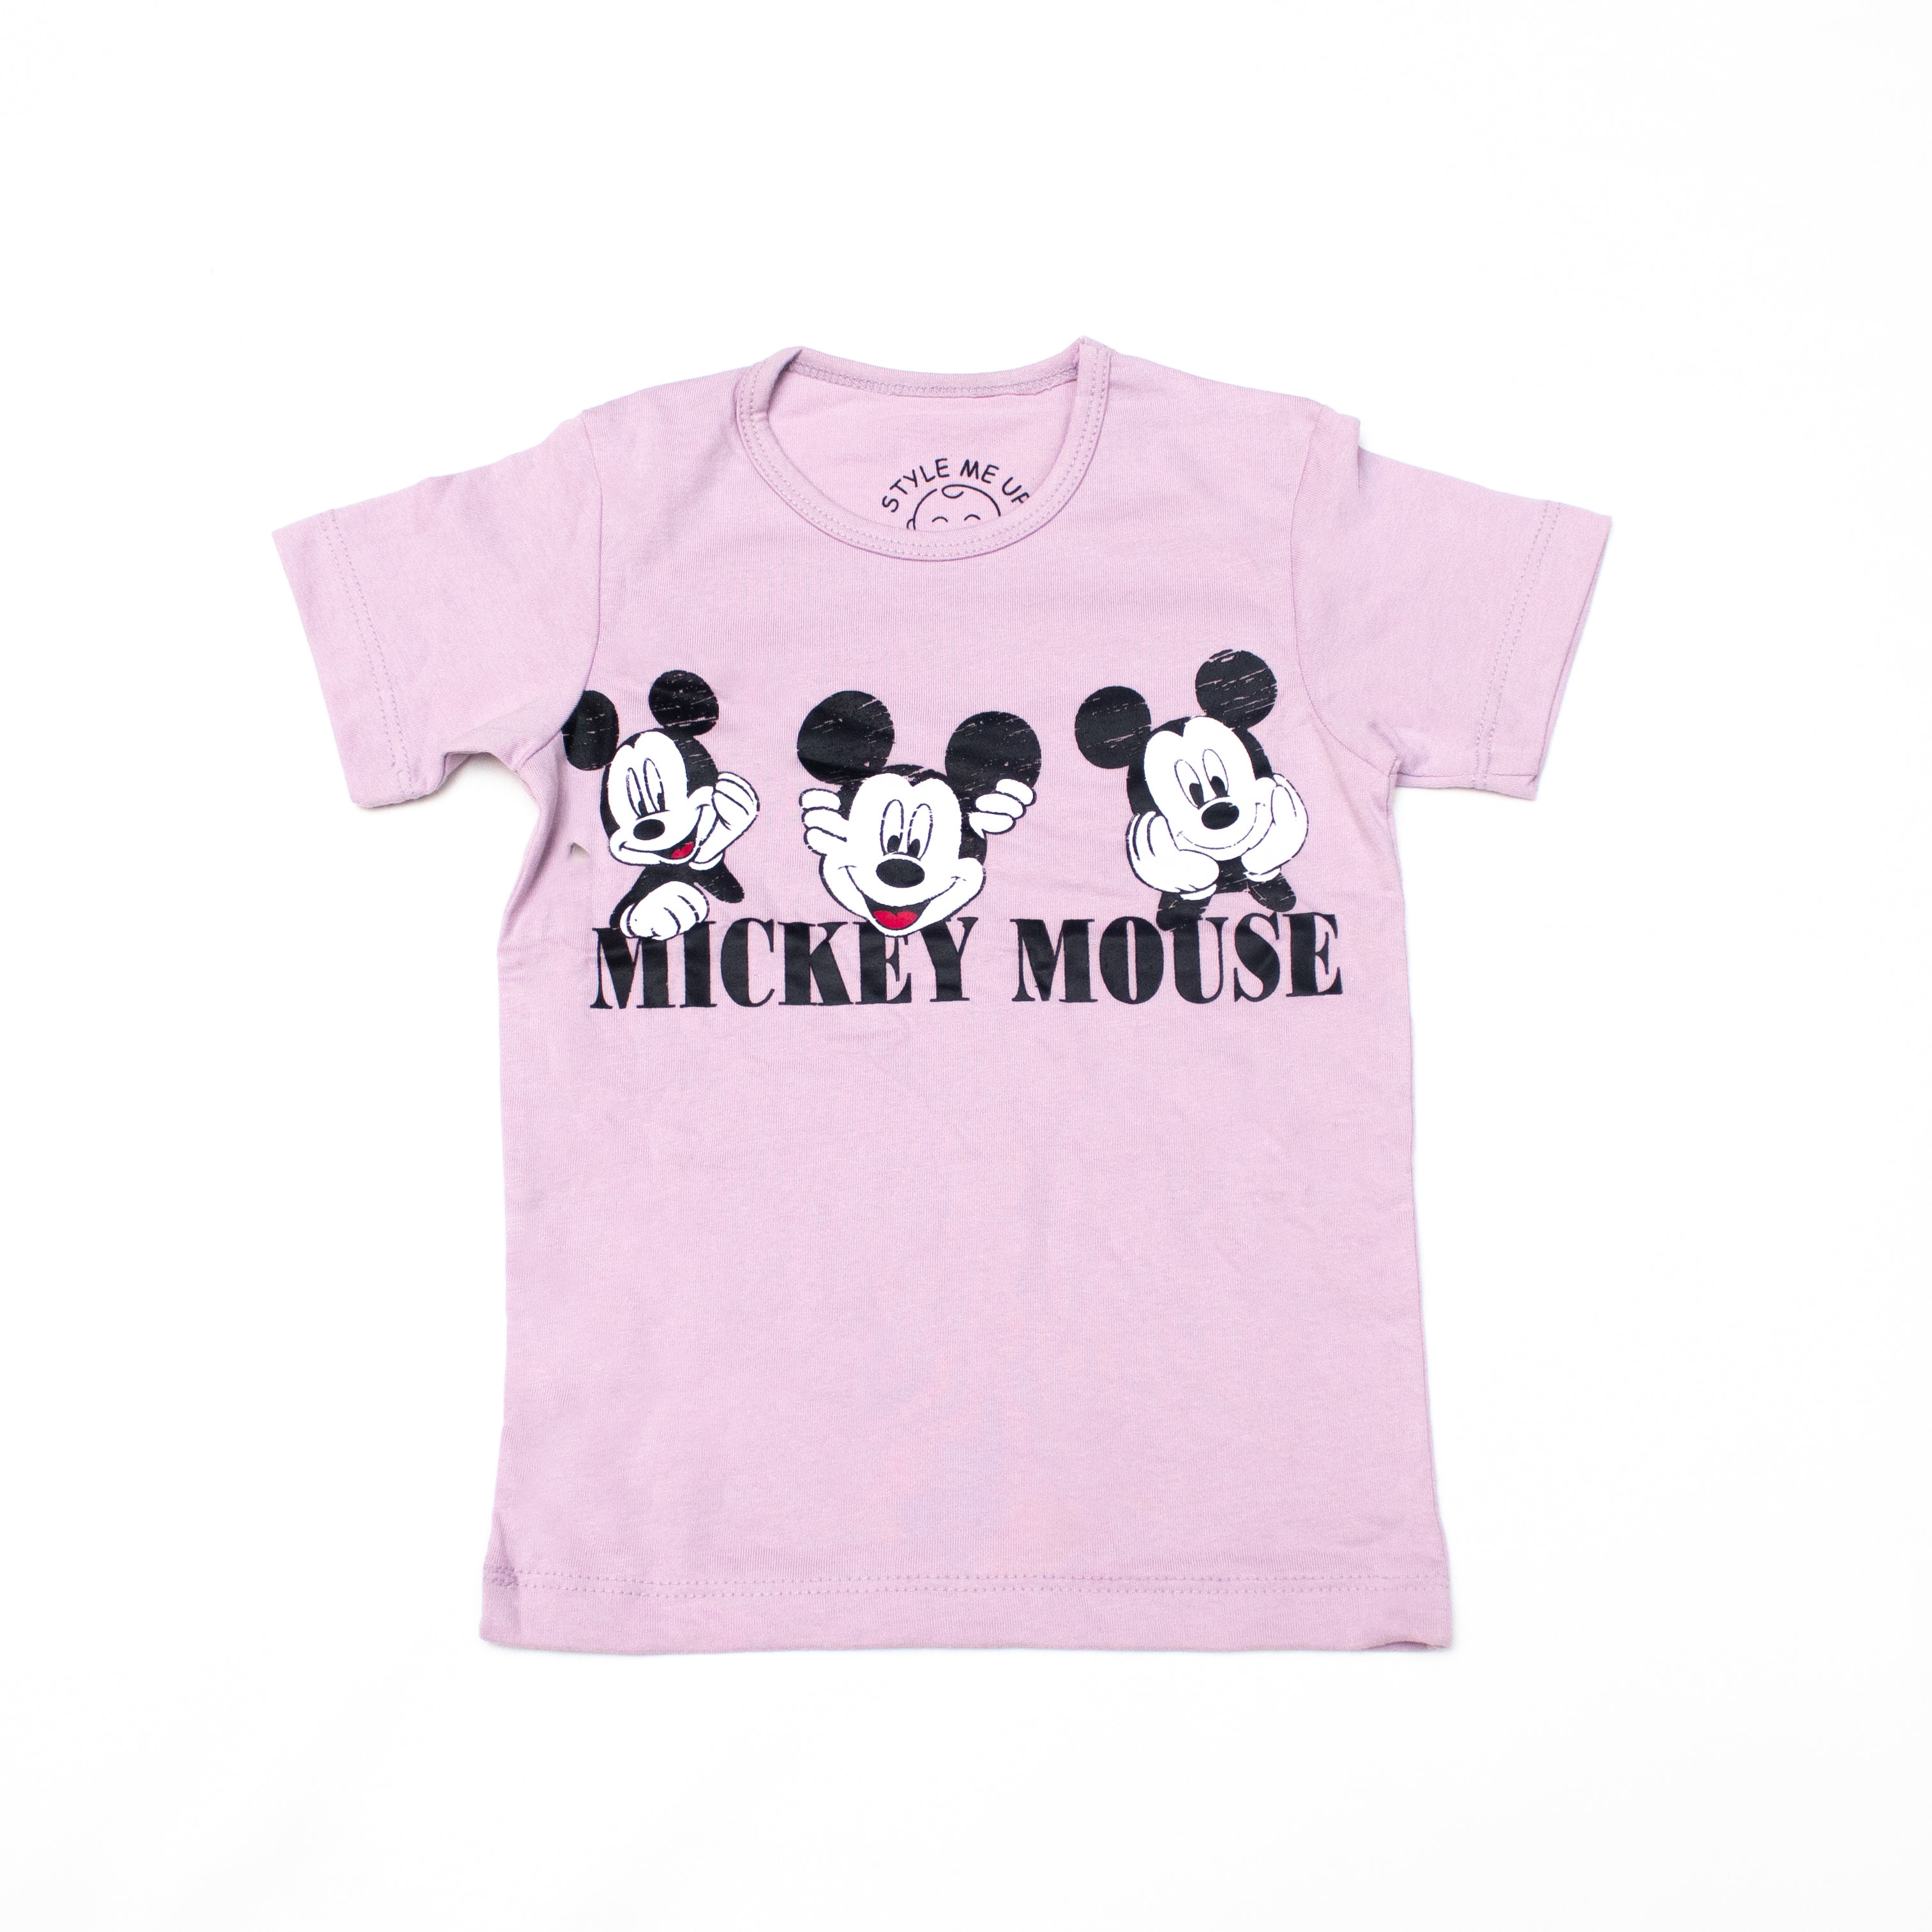 Purple Mickey Mouse T-Shirt And Shorts For Kids